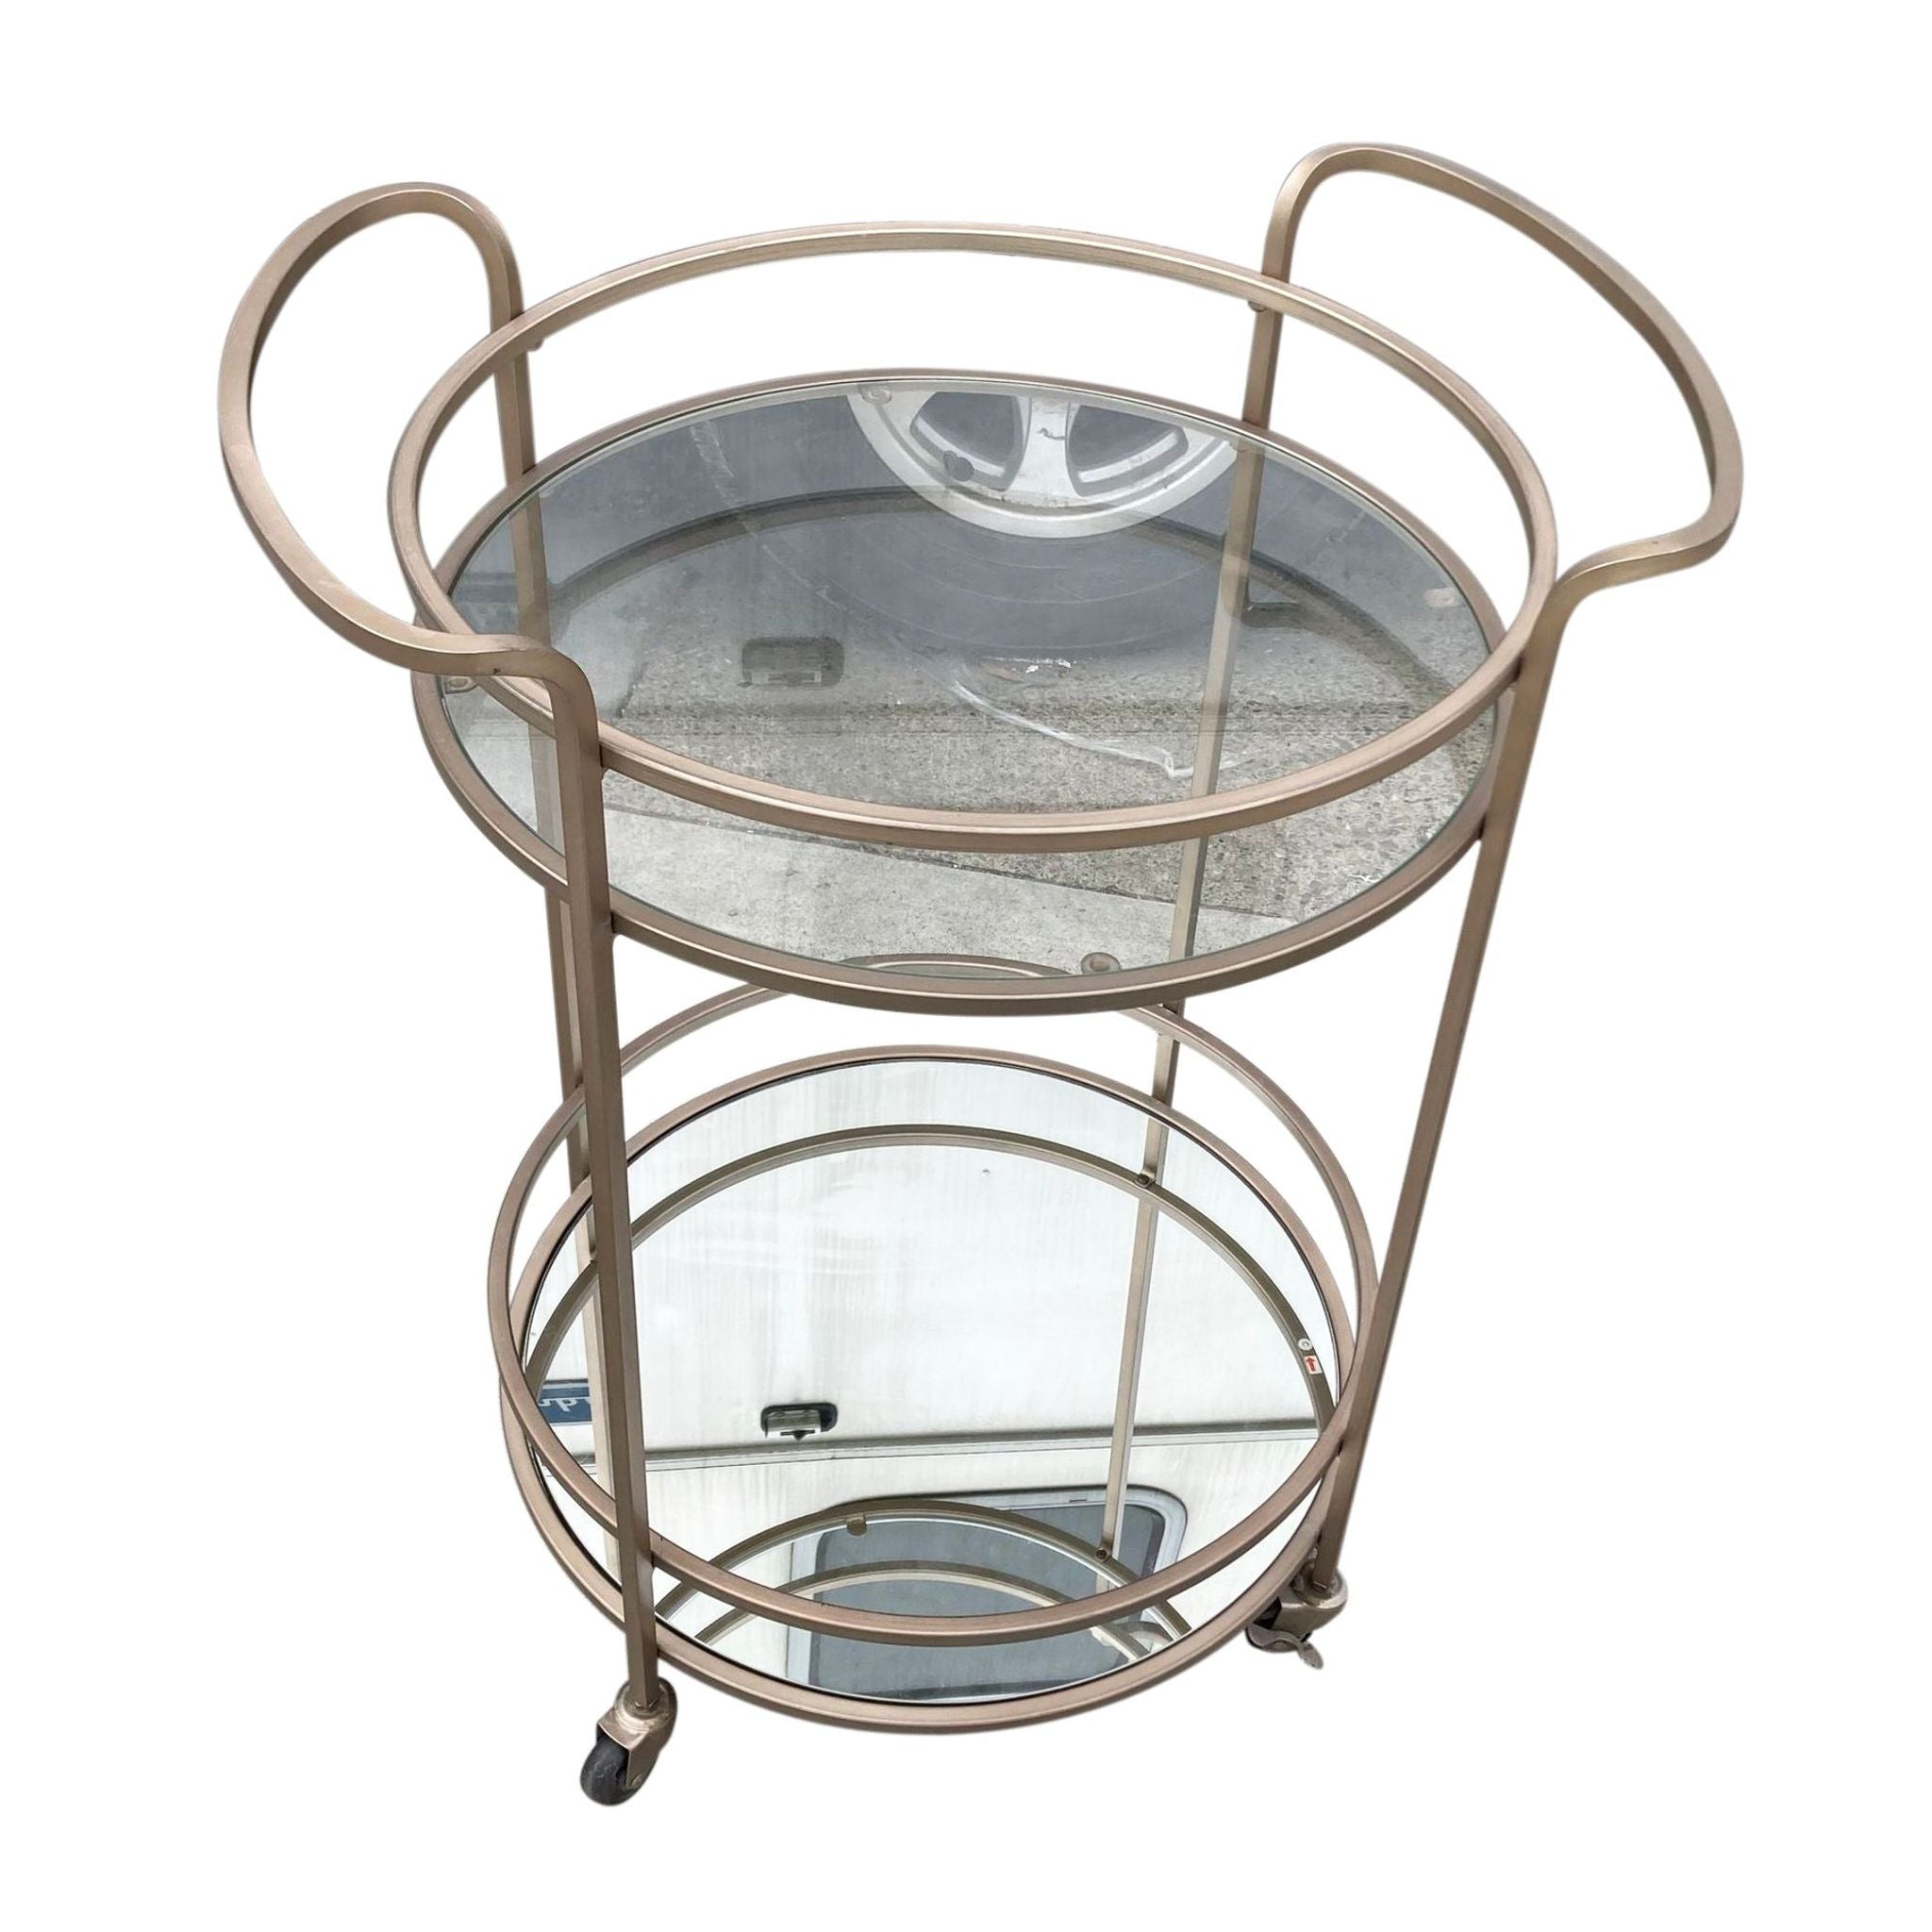 Reperch-brand two-tier circular bar cart with upper smoked glass and lower mirrored shelf, featuring wheels.